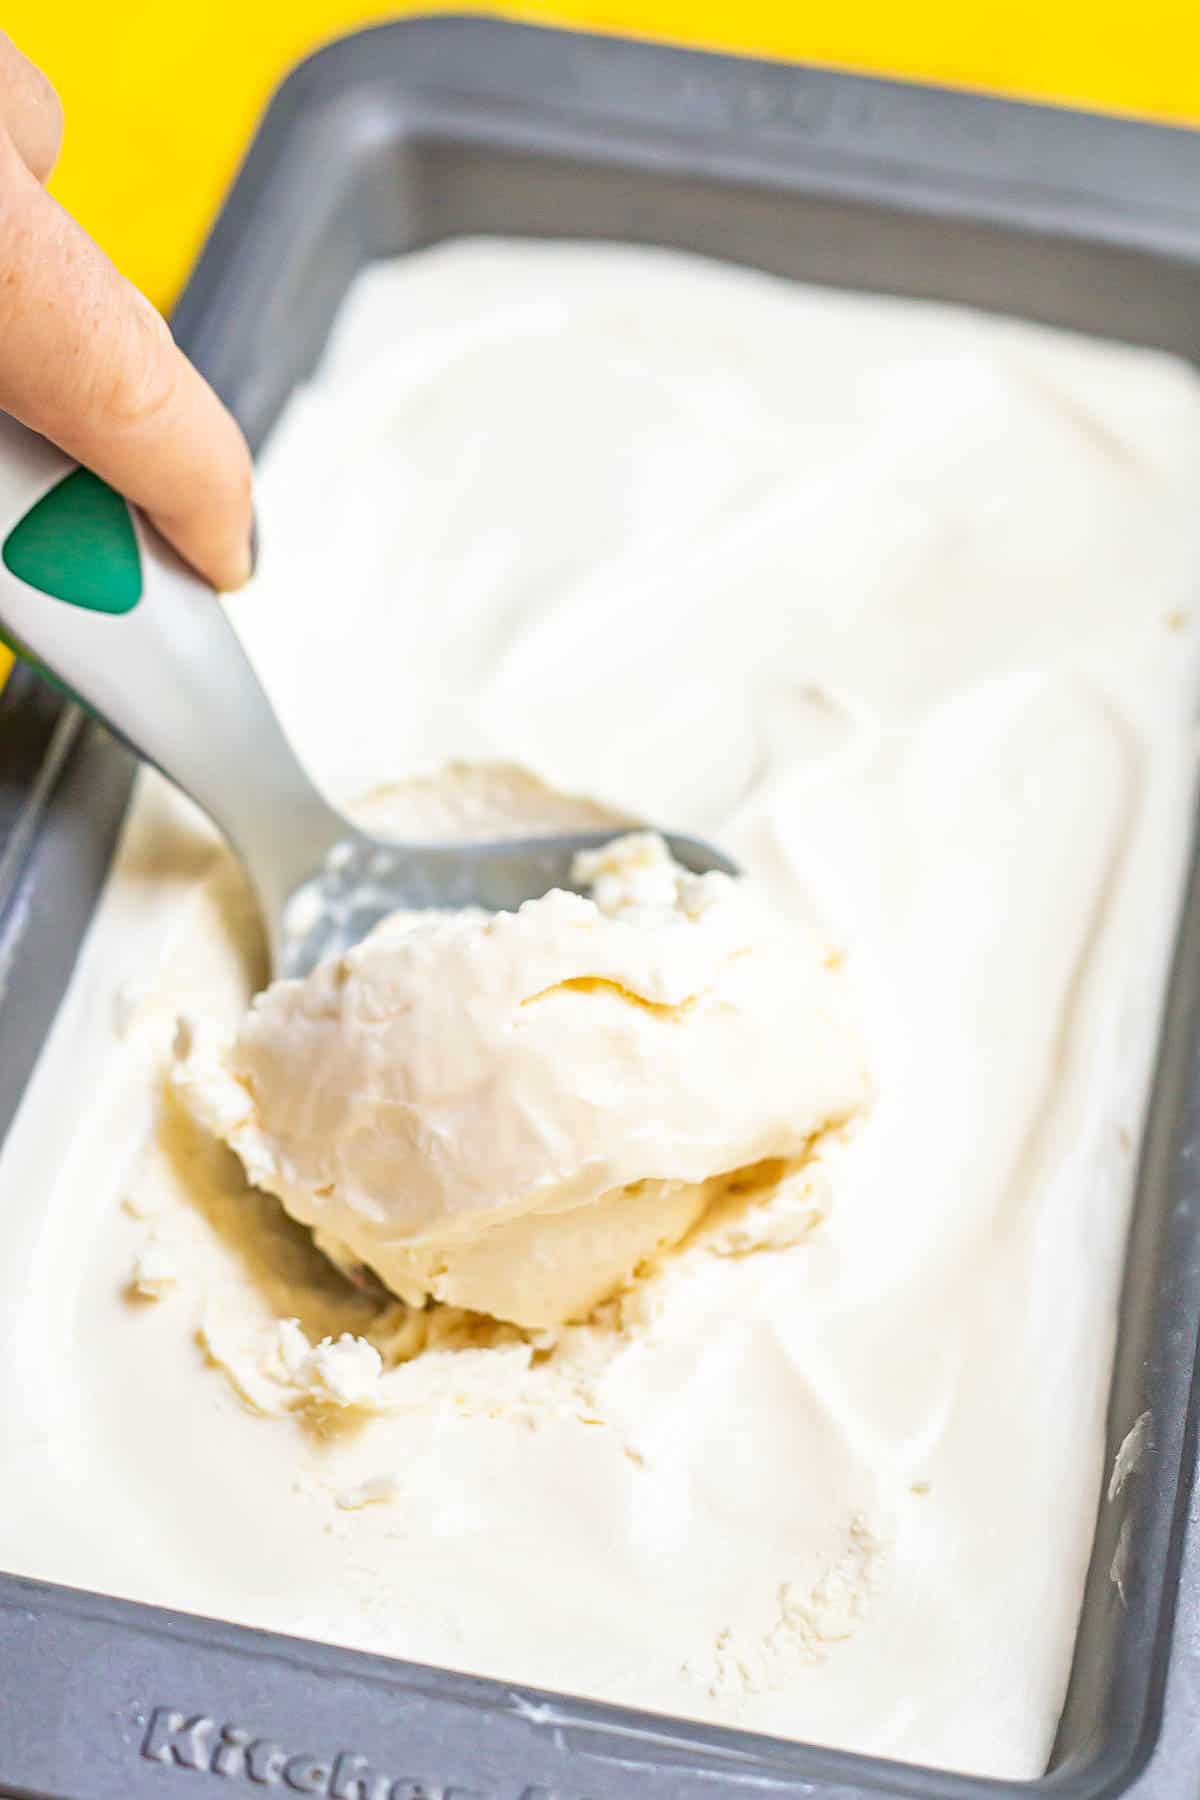 A scoop of homemade vanilla ice cream being scraped up from a silver pan.